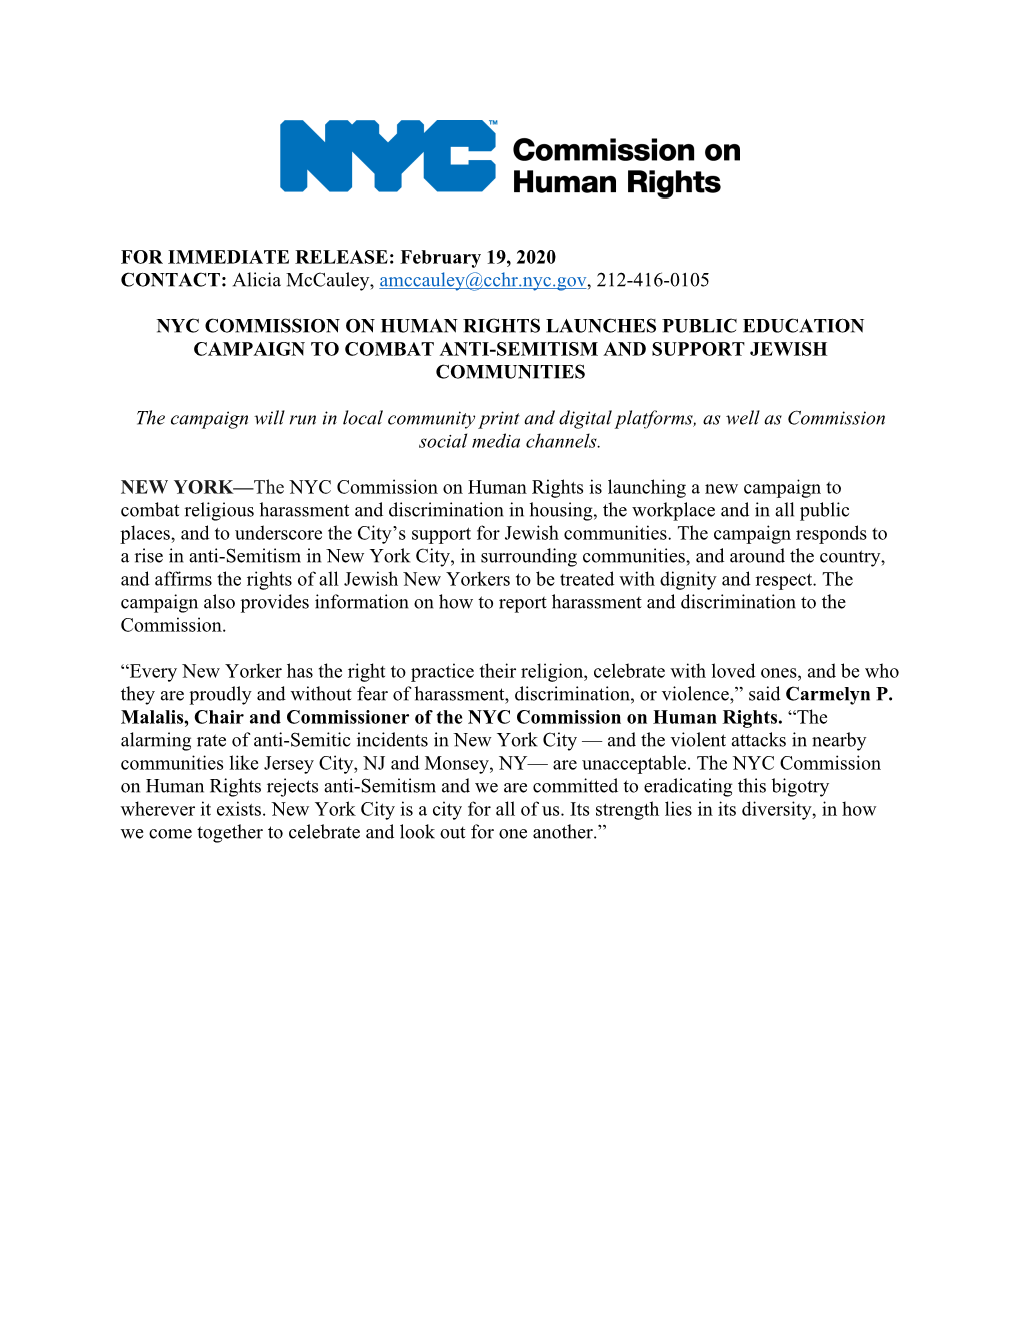 Read the Press Release on the Jewish New Yorkers Campaign